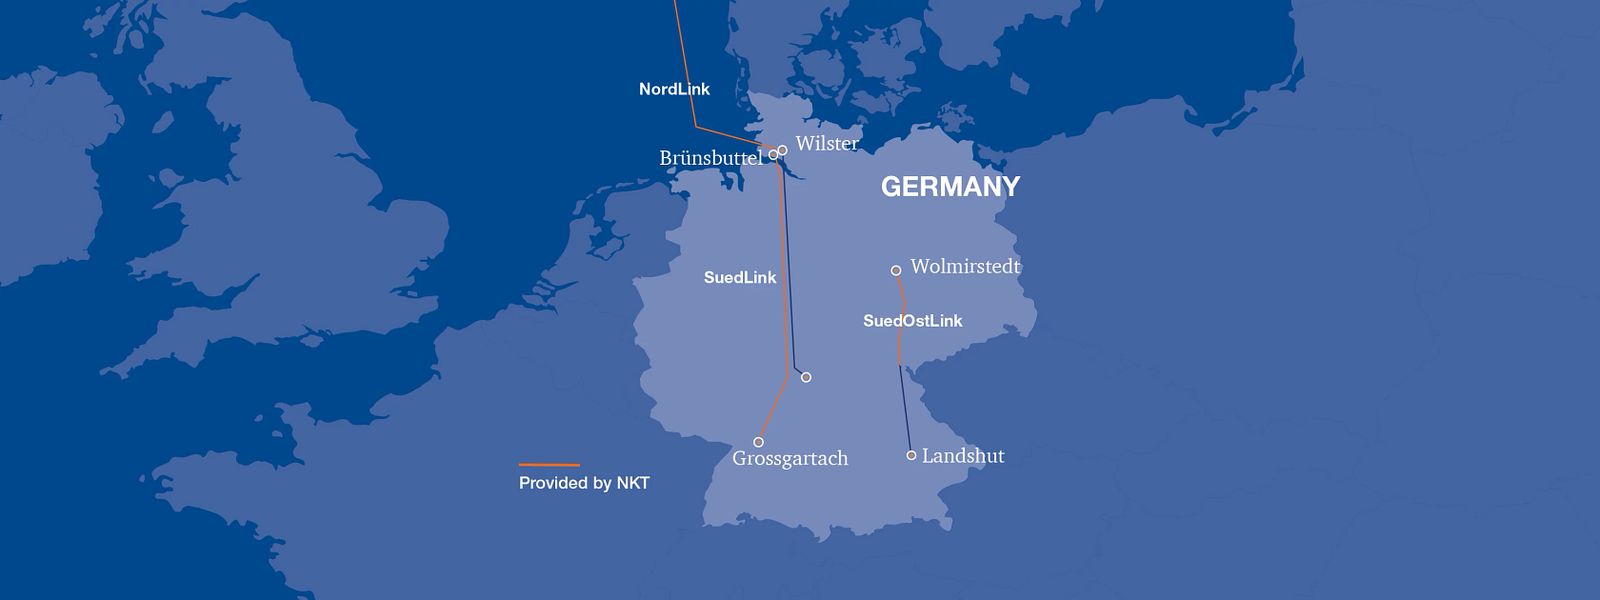 Germany map with corridor projects and NKT sections